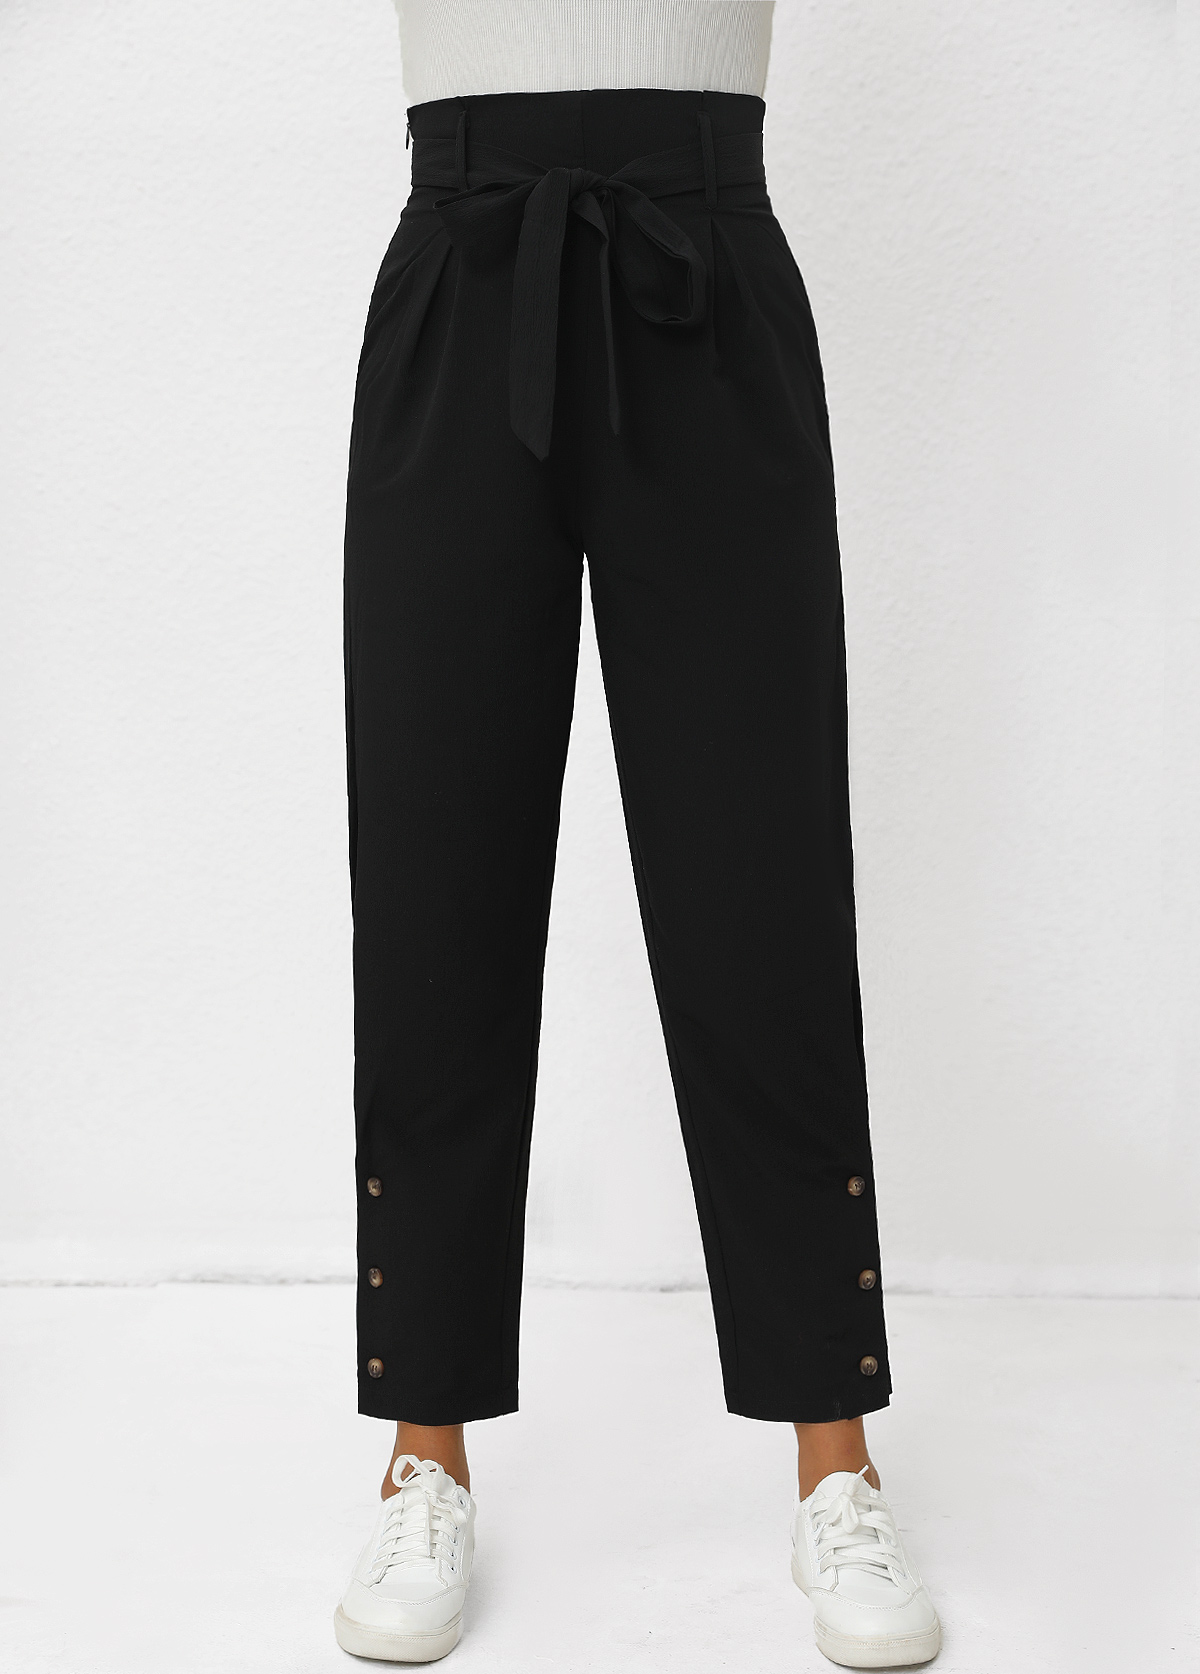 Black Button Belted Zipper Fly High Waisted Pants